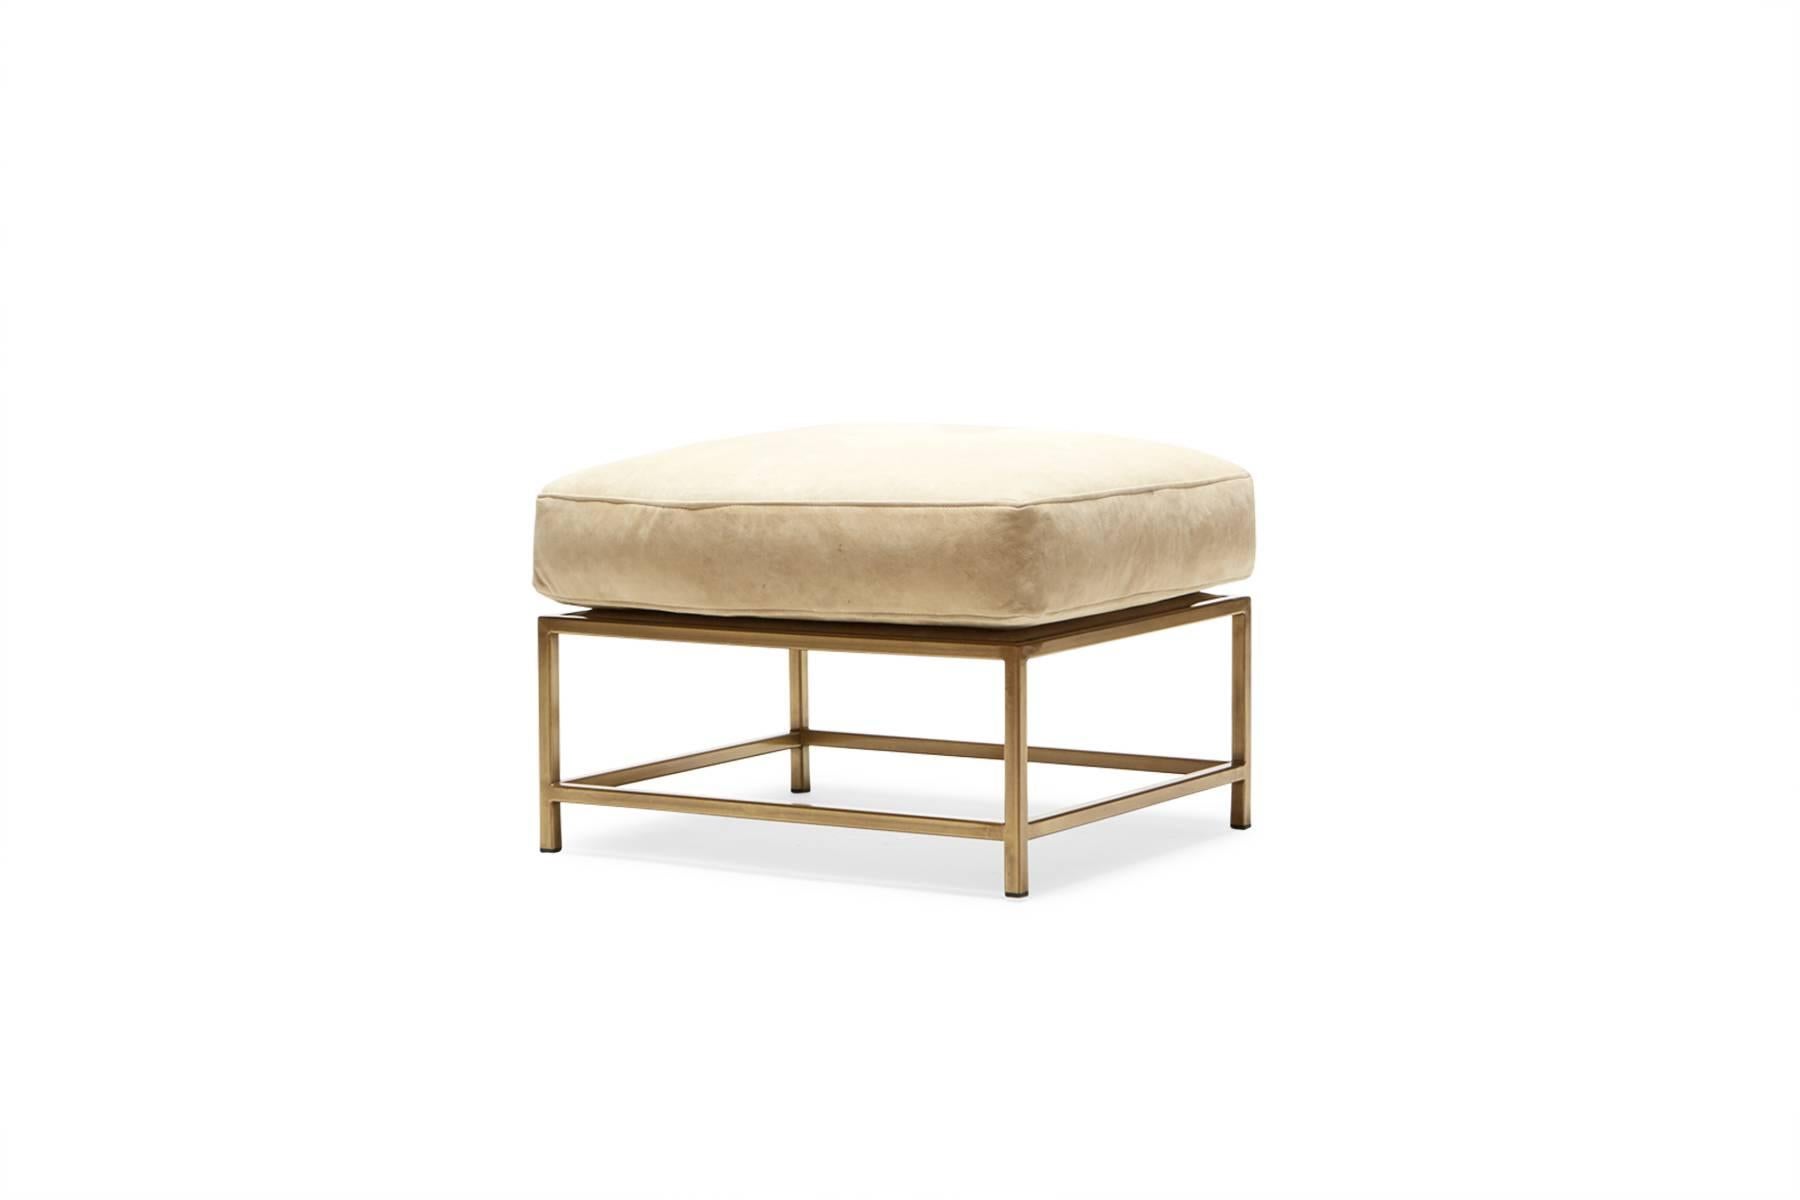 The Ottoman from Stephen Kenn's Inheritance Collection is an easily customizable design that can be used to add a lounge element to any seating arrangement, and pairs especially well with the other seating options in the Inheritance